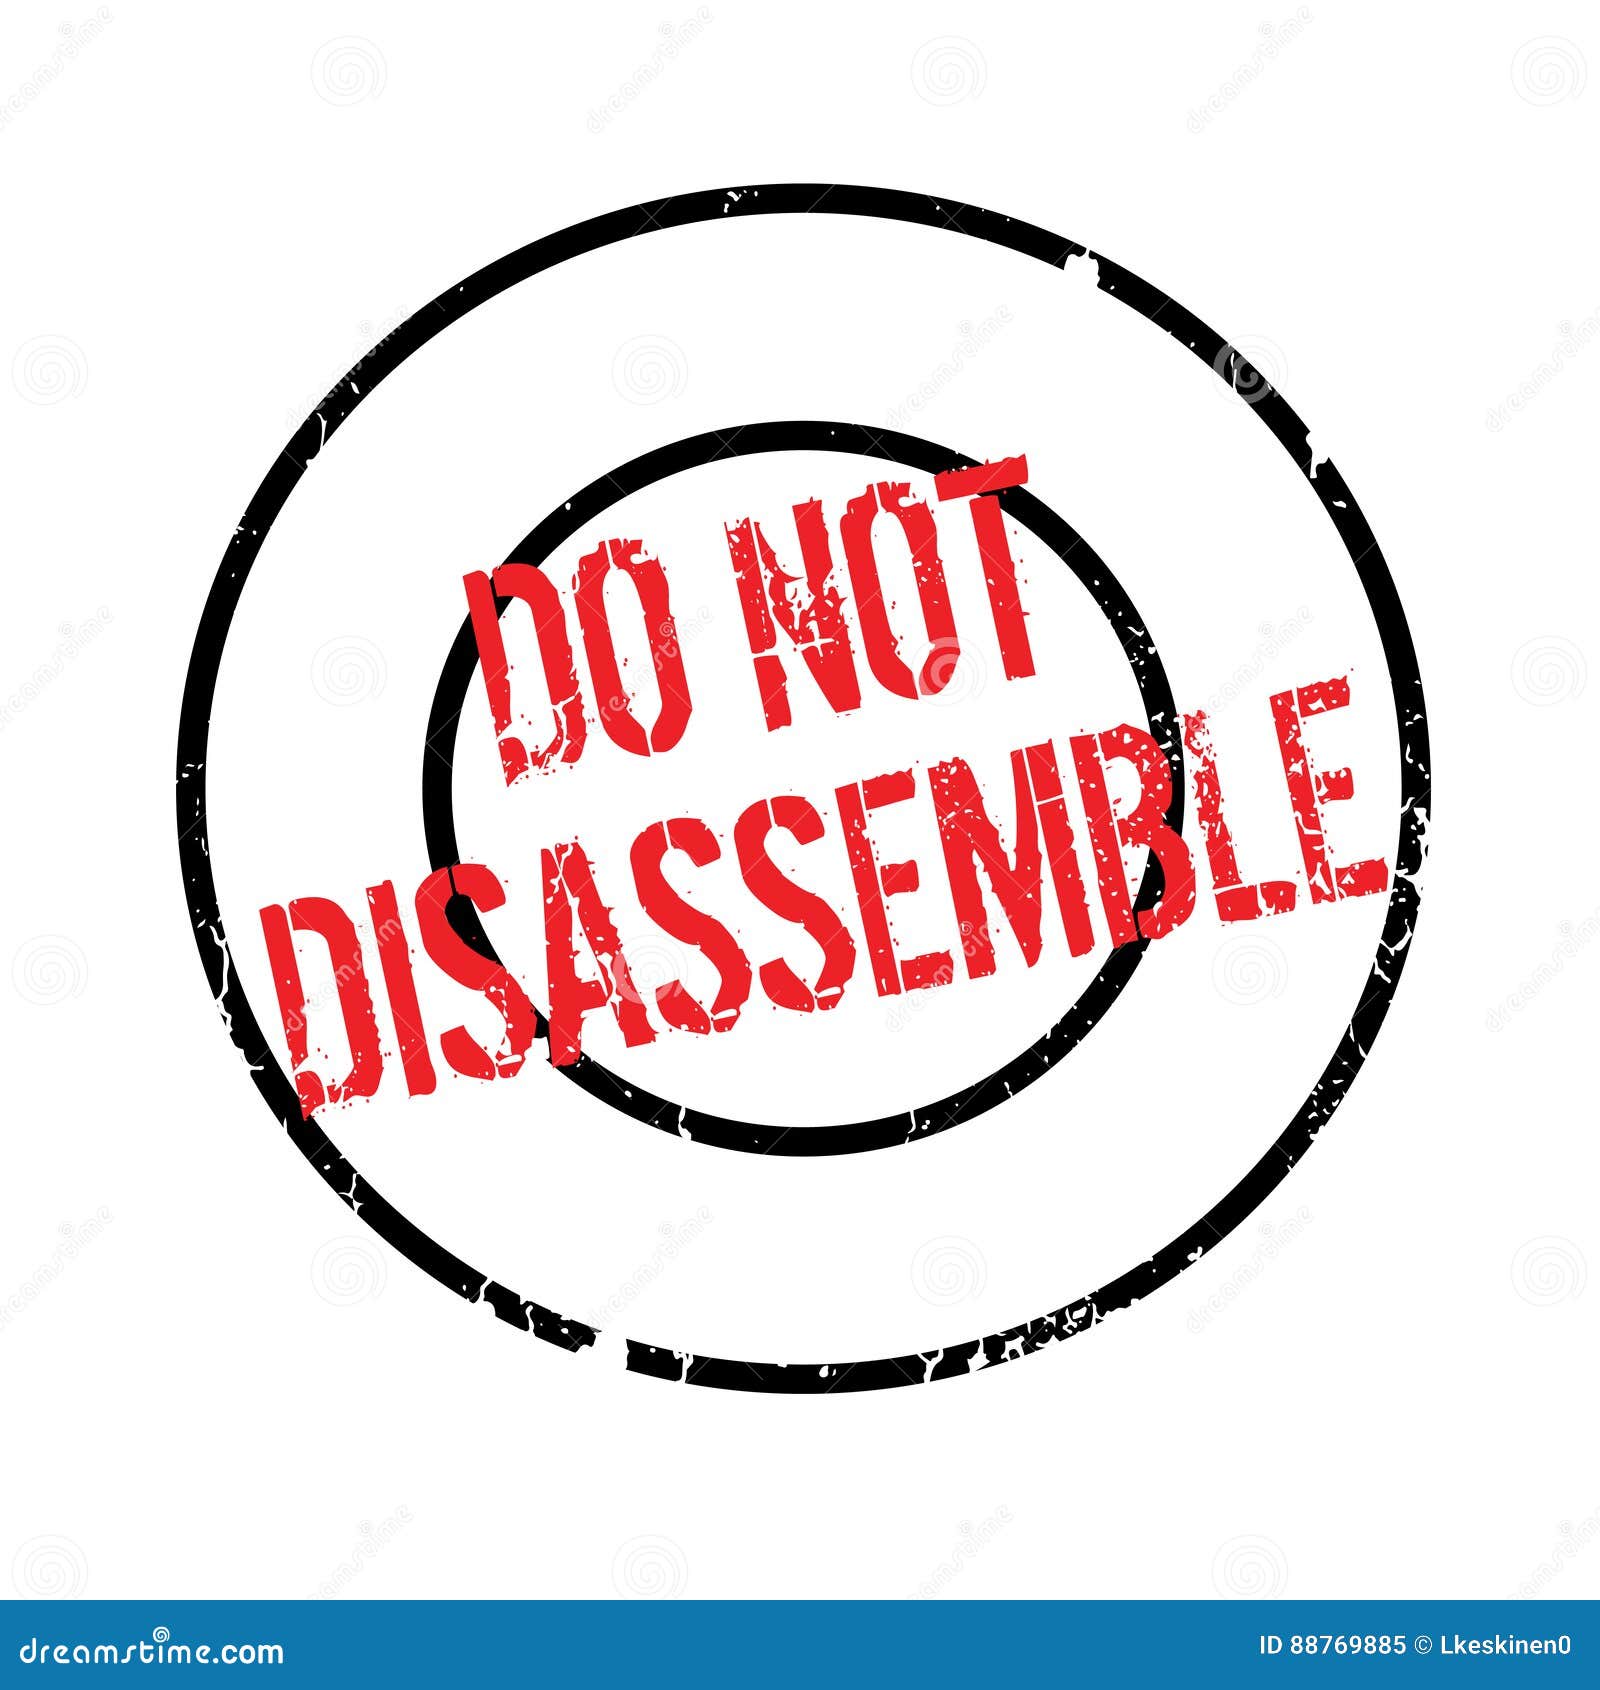 do not disassemble rubber stamp